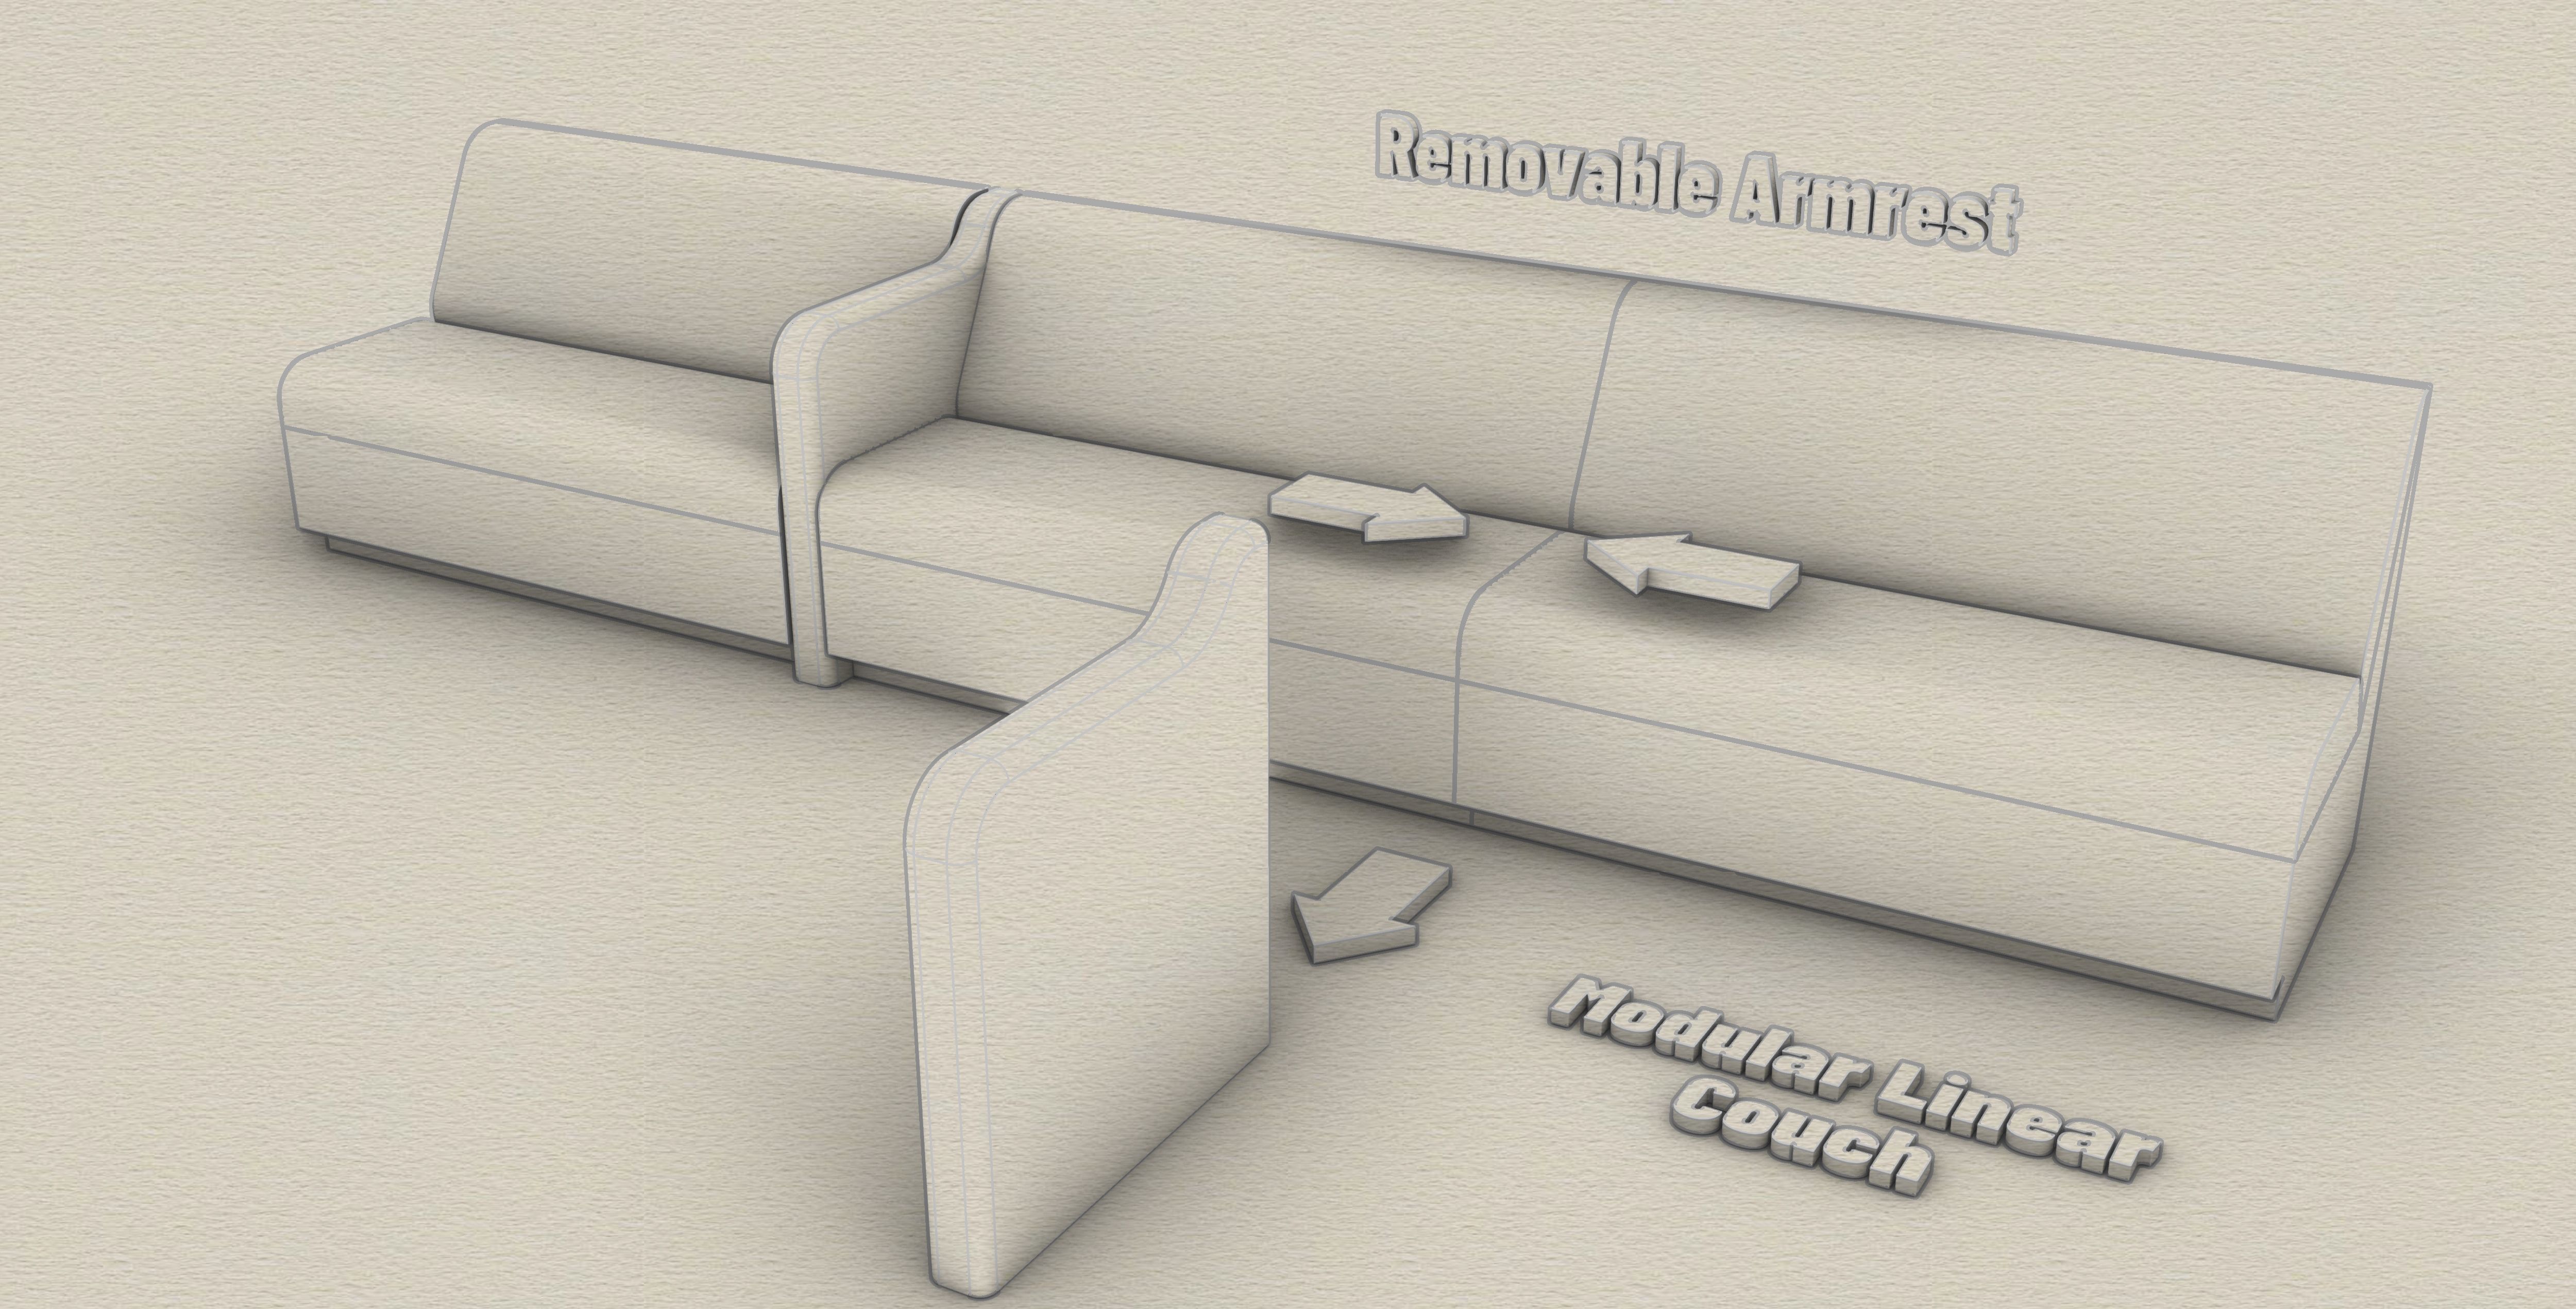 MODULAR LINEAR nightclub couch with adjustable armrest 3d model